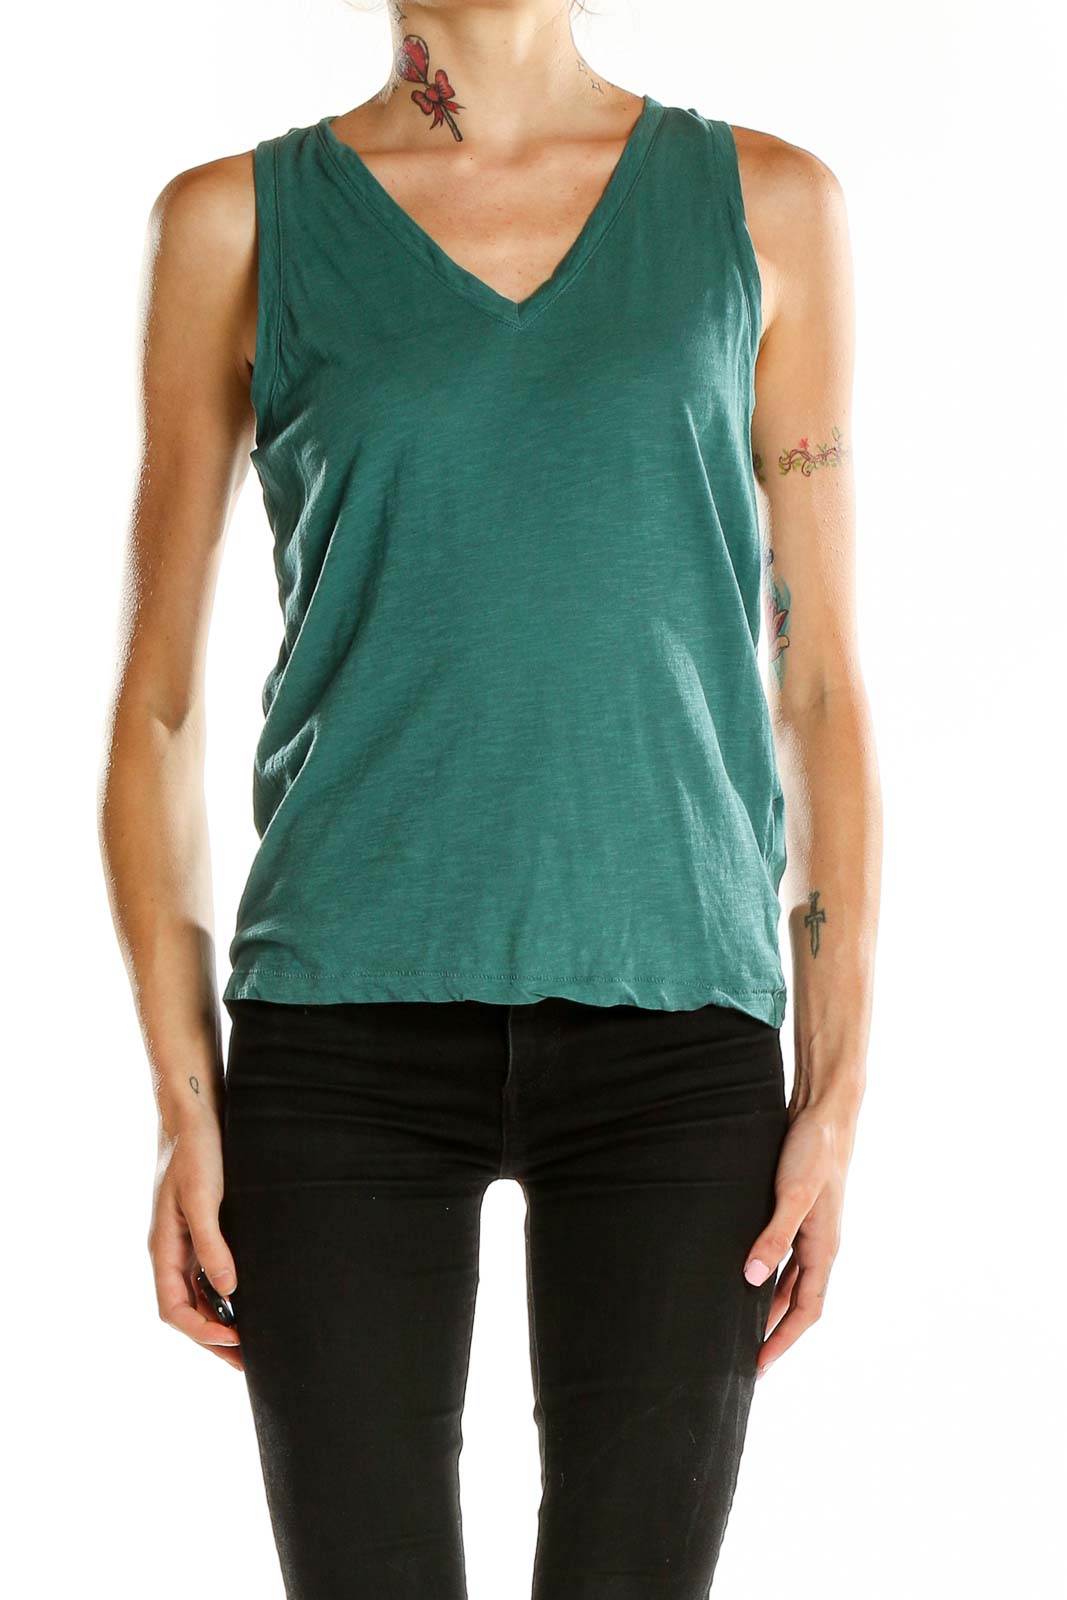 Green V Neck Casual Tank Top Front